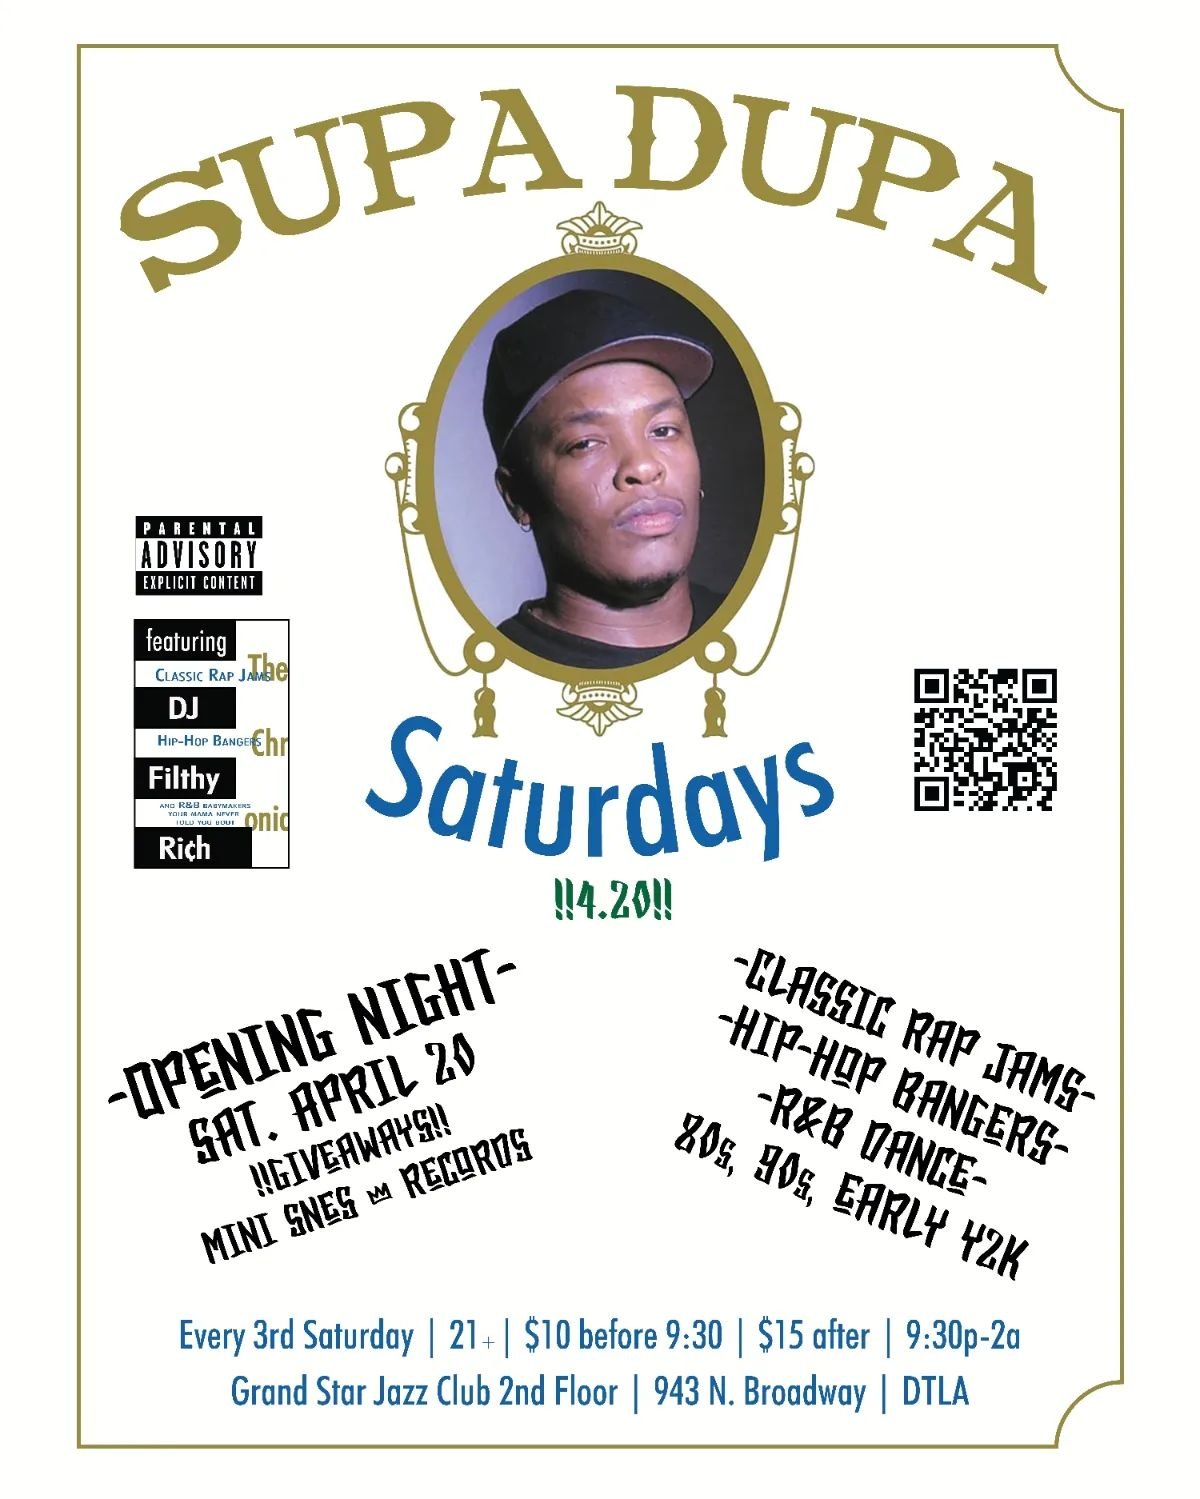 DISCOUNT Presale Tickets are now live!! Get em while they're hot at http://supadupala.com ! Throwback Rap, Hip-hop and R&amp;B. That's what's up, LA!